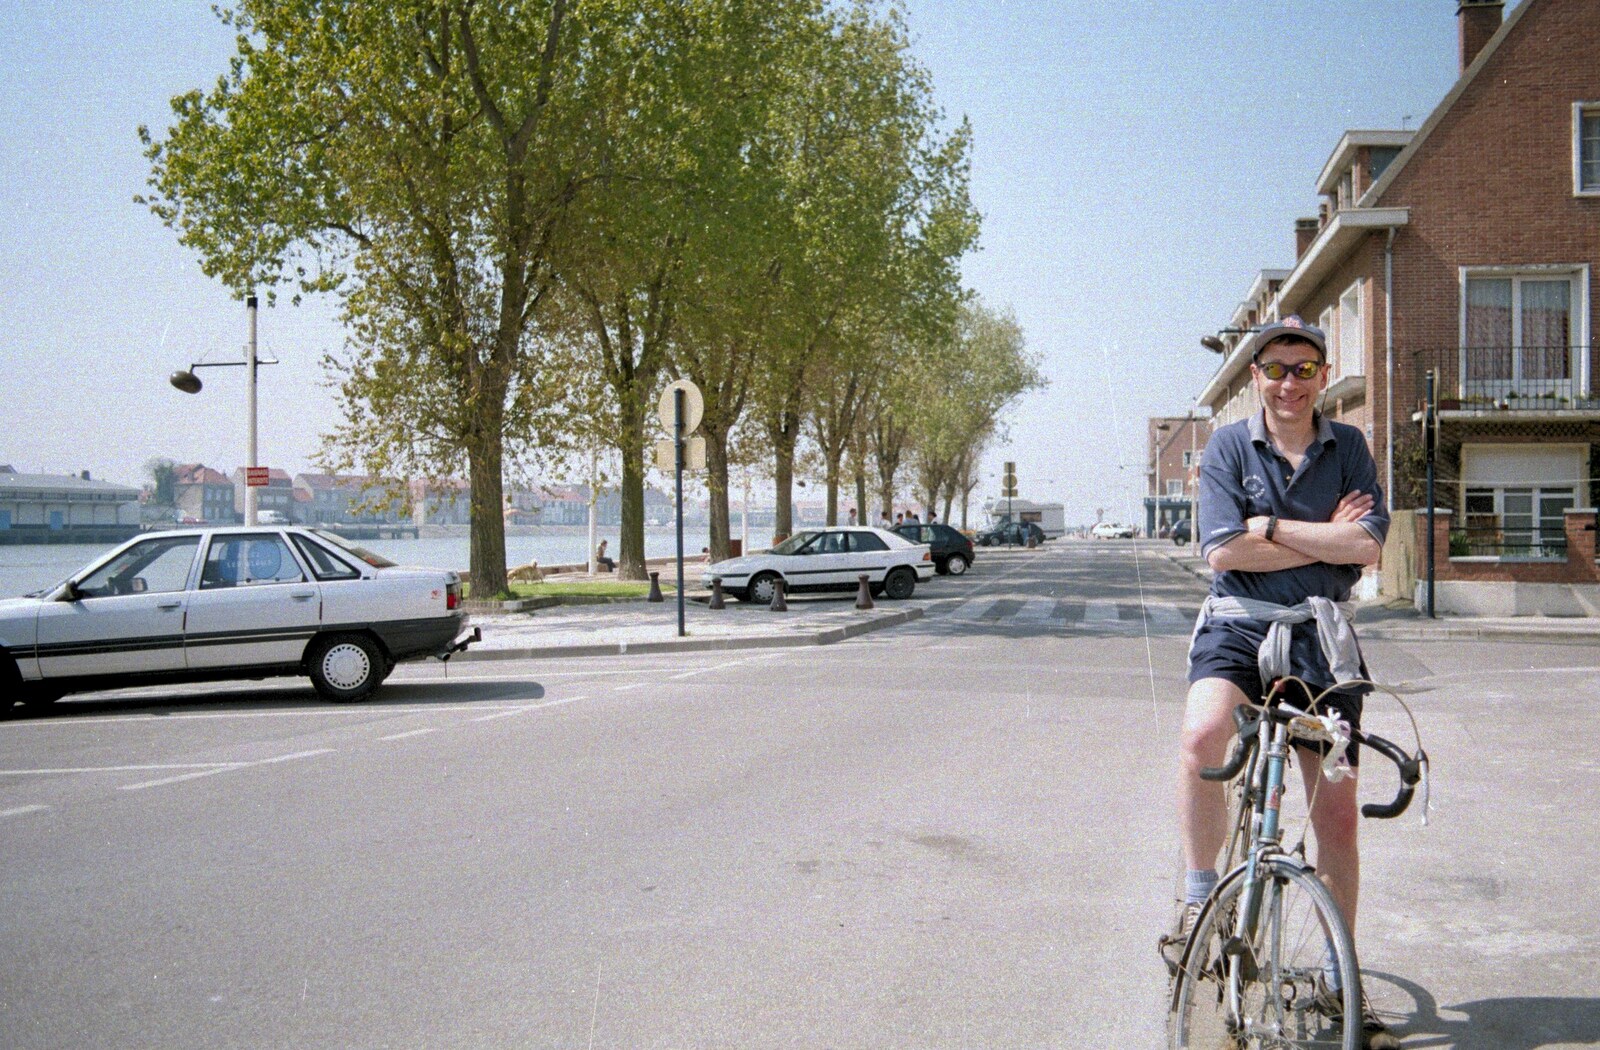 Apple John on his bike from A BSCC Bike Ride to Gravelines, Pas de Calais, France - 11th May 2000